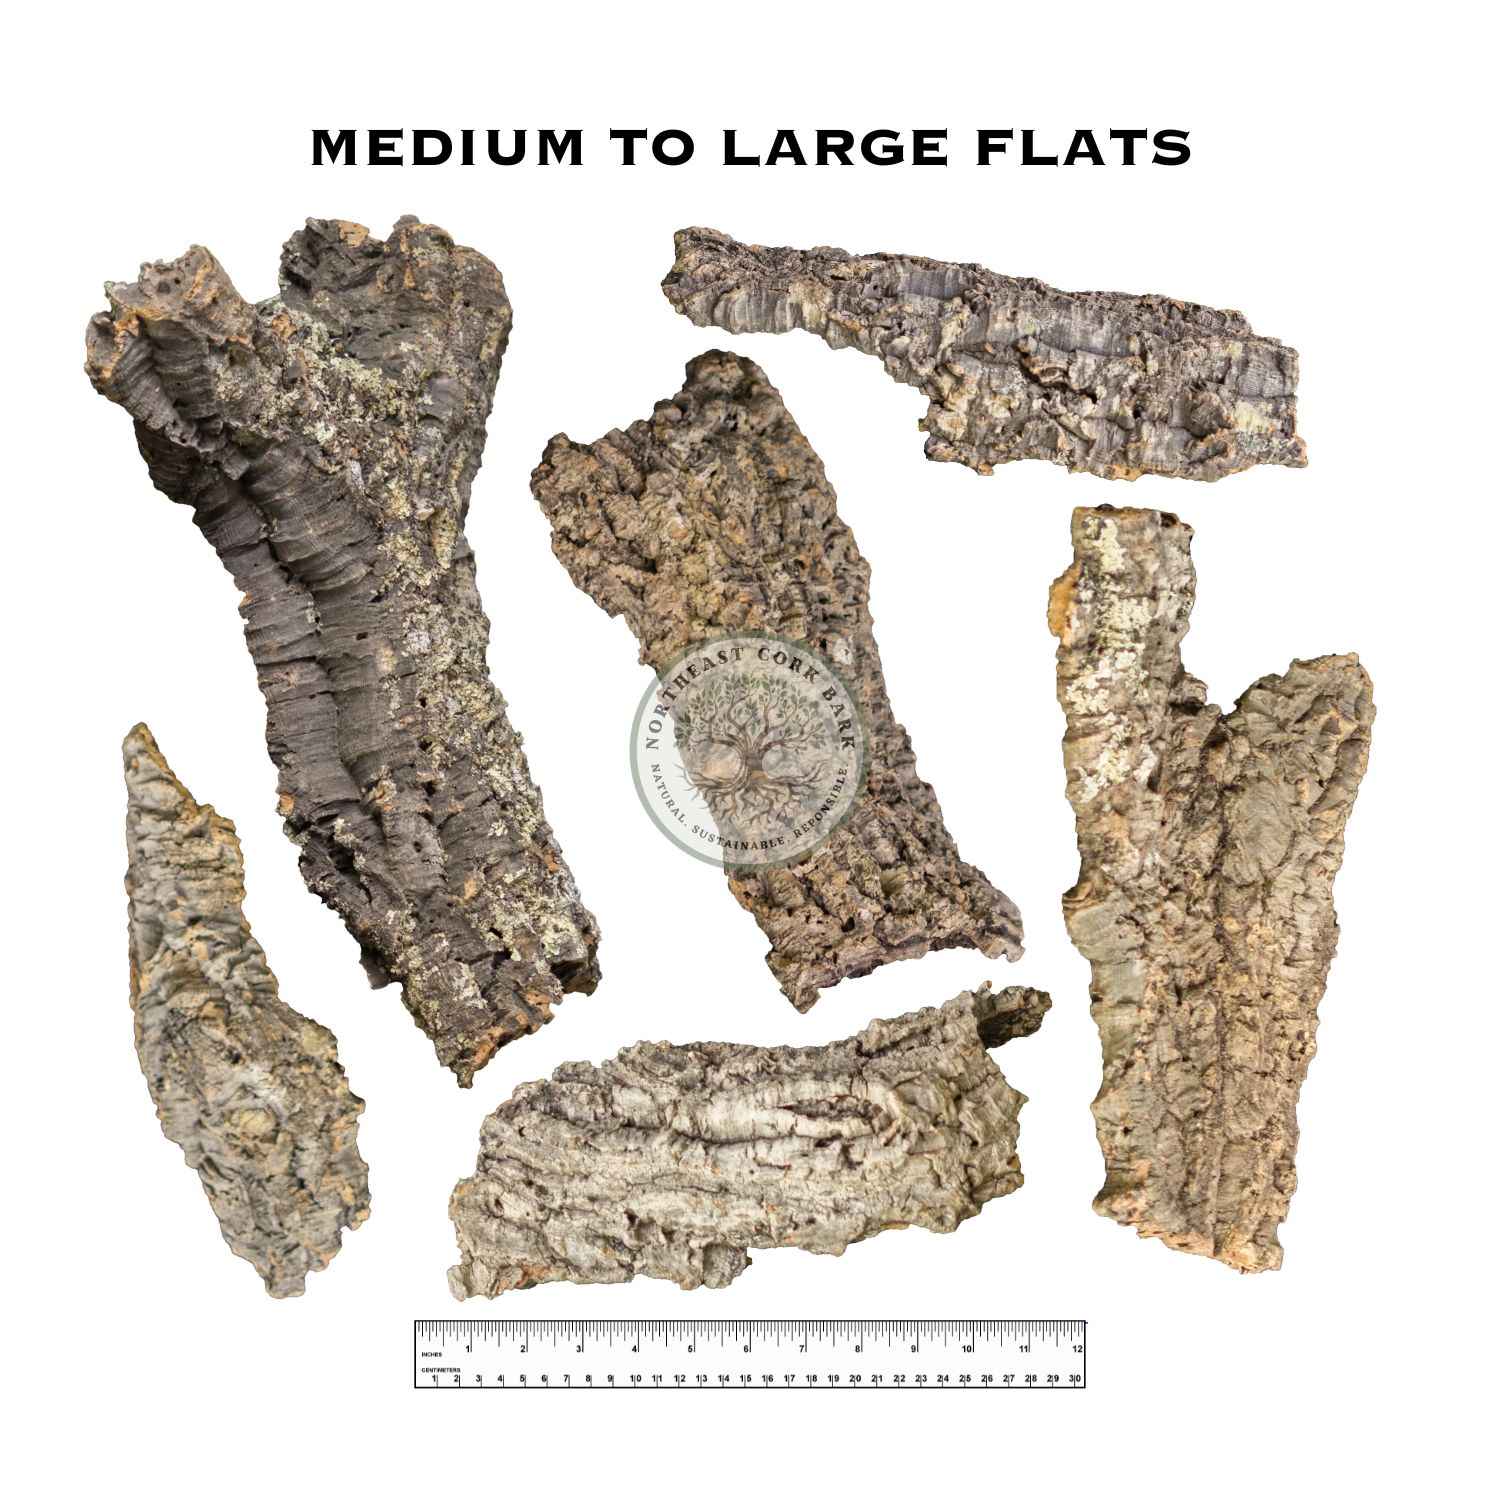 Premium Medium to Large Natural Cork Bark Flats and Half Rounds Sizing Guide for Reptiles, Vivariums, and More.